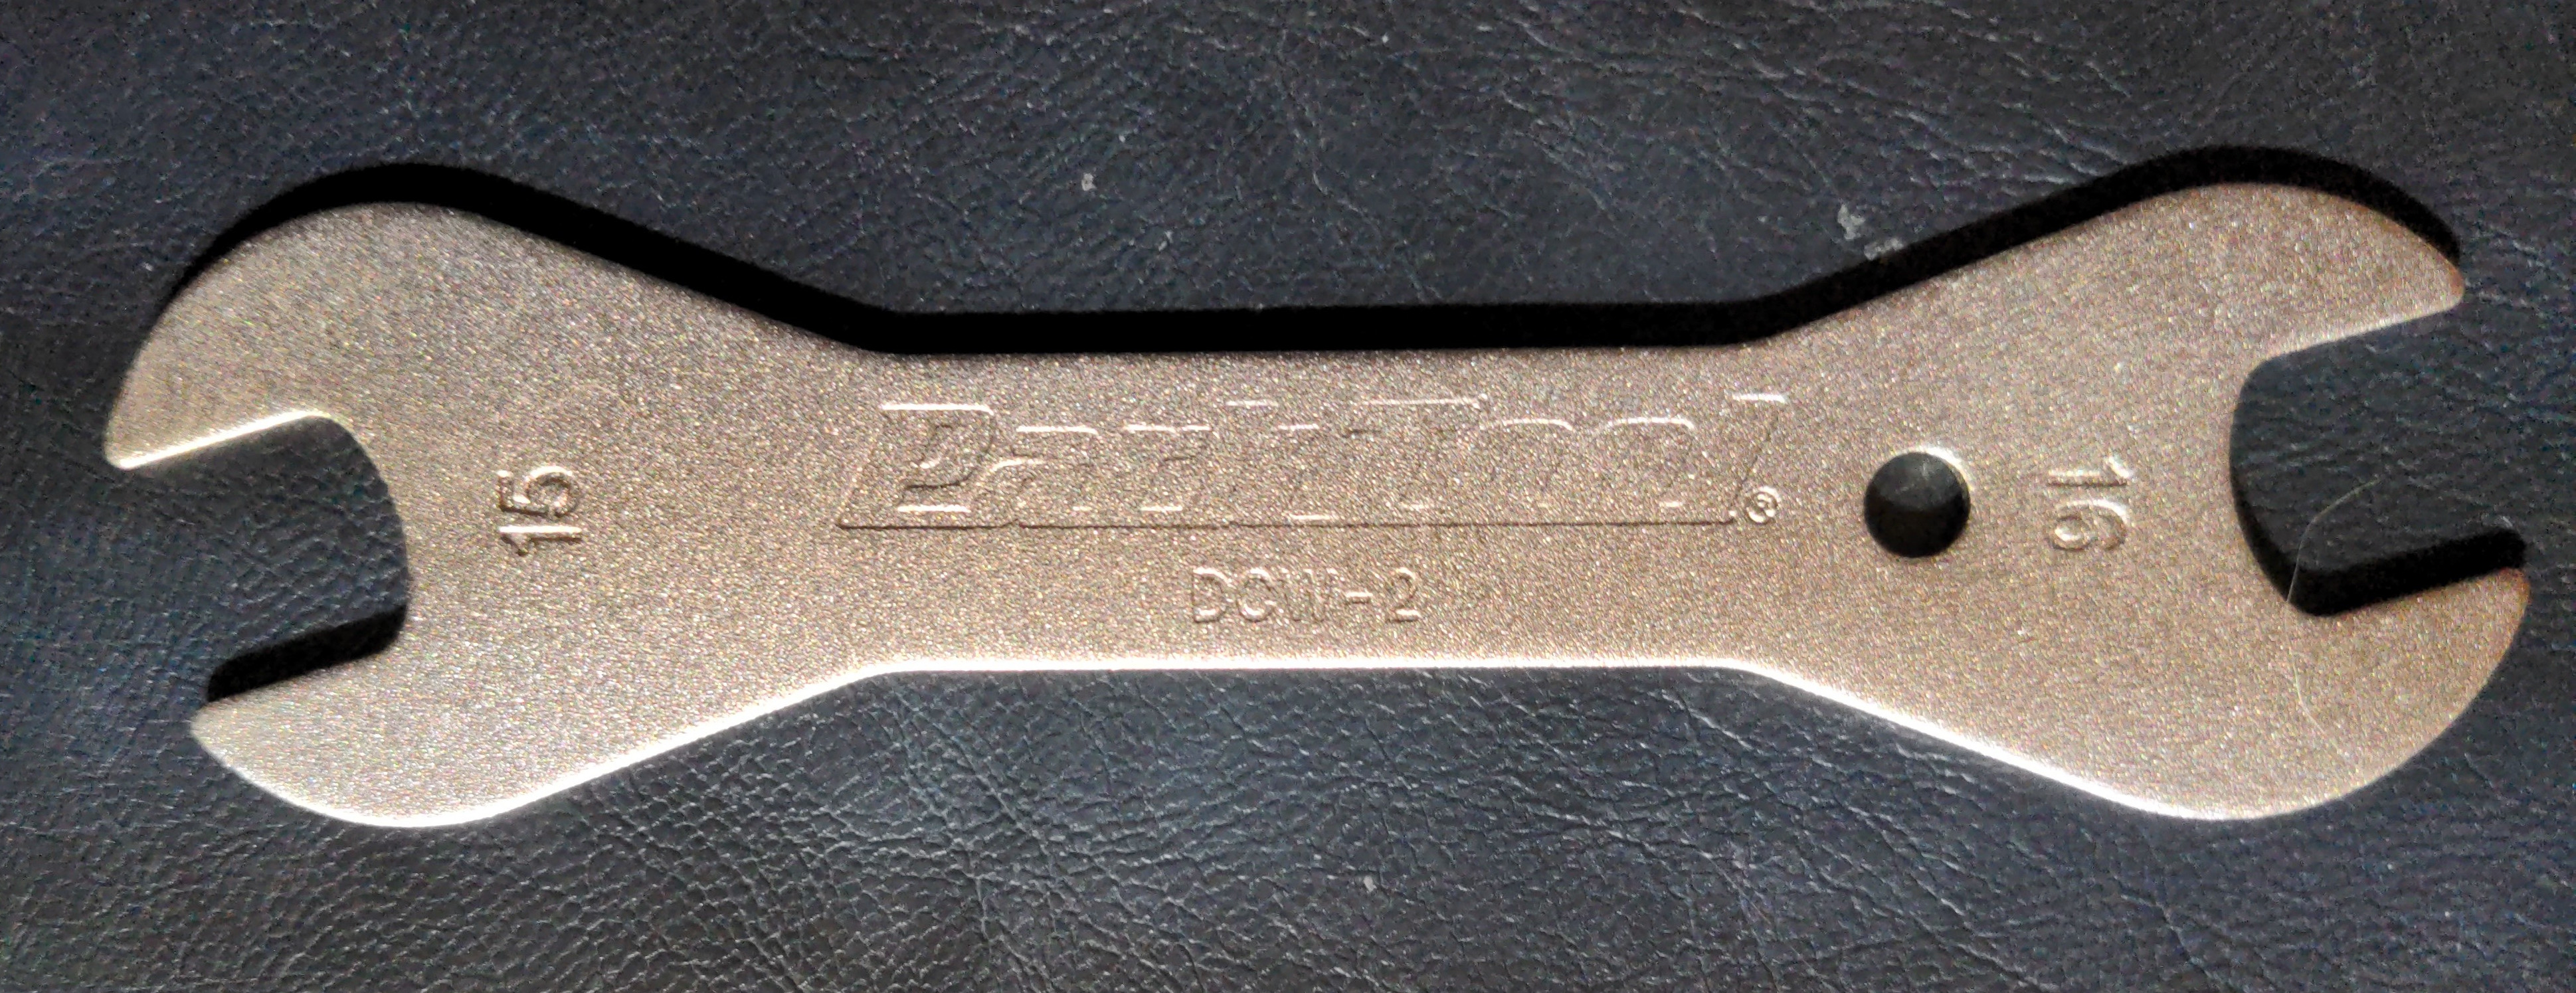 A 15/16mm cone wrench